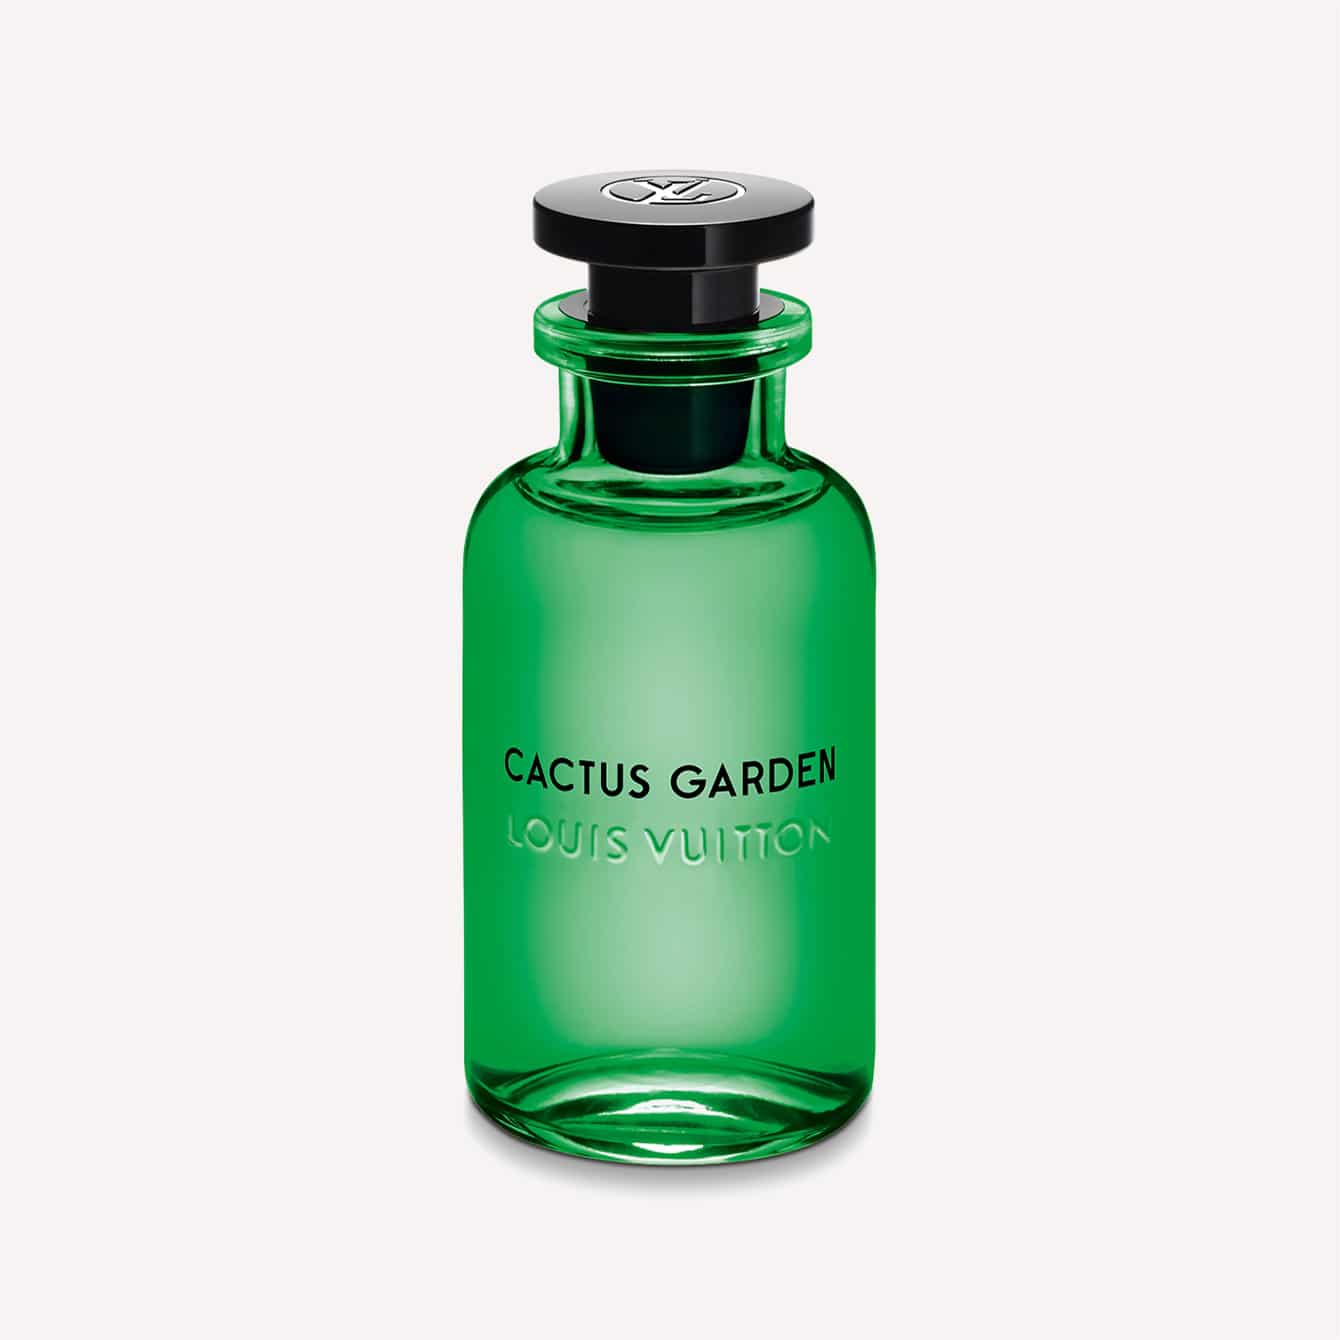 11 Best Louis Vuitton Colognes for Men (and 2 to Avoid) - 7Gents